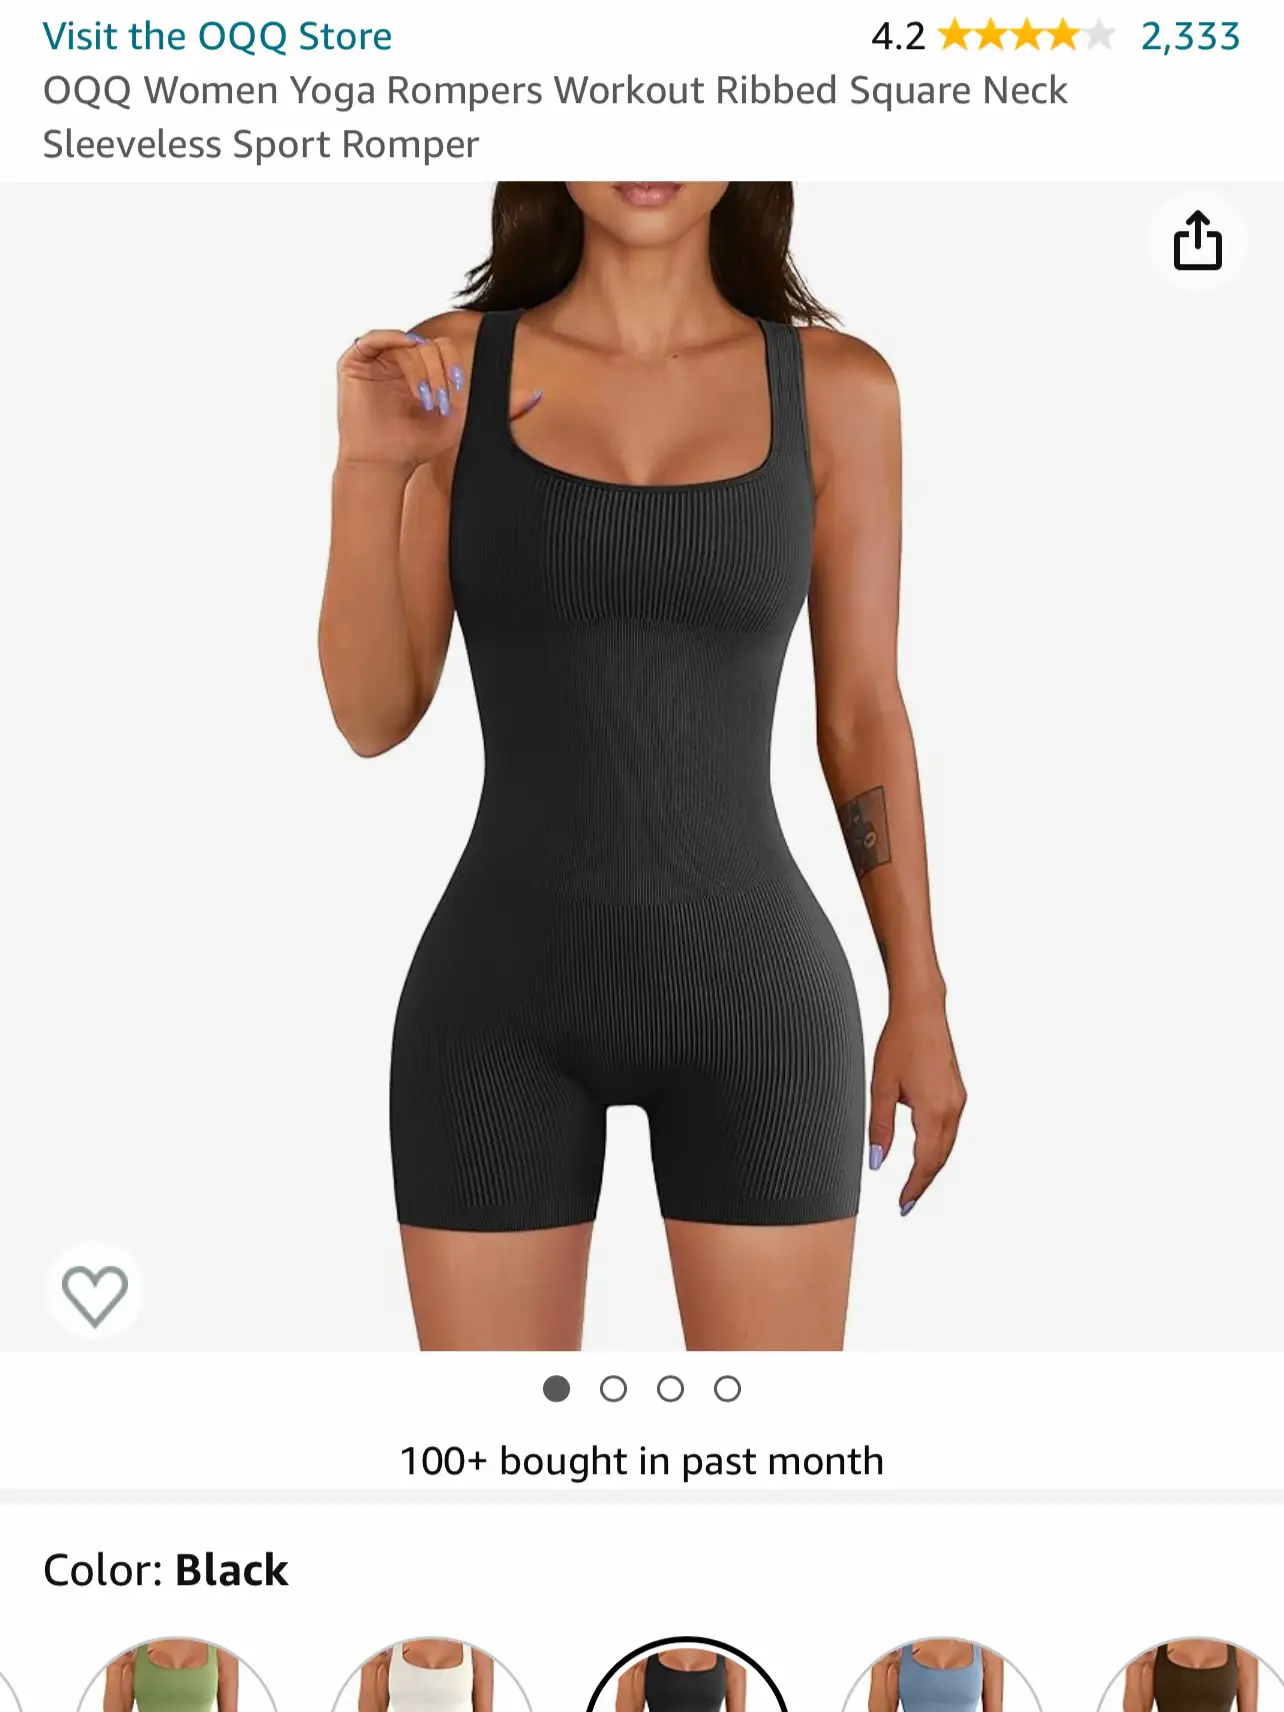 I'm 5'1” and a size XL - I tried the TikTok viral bodysuit, I didn't think  it would fit but the 'boob pockets' helped